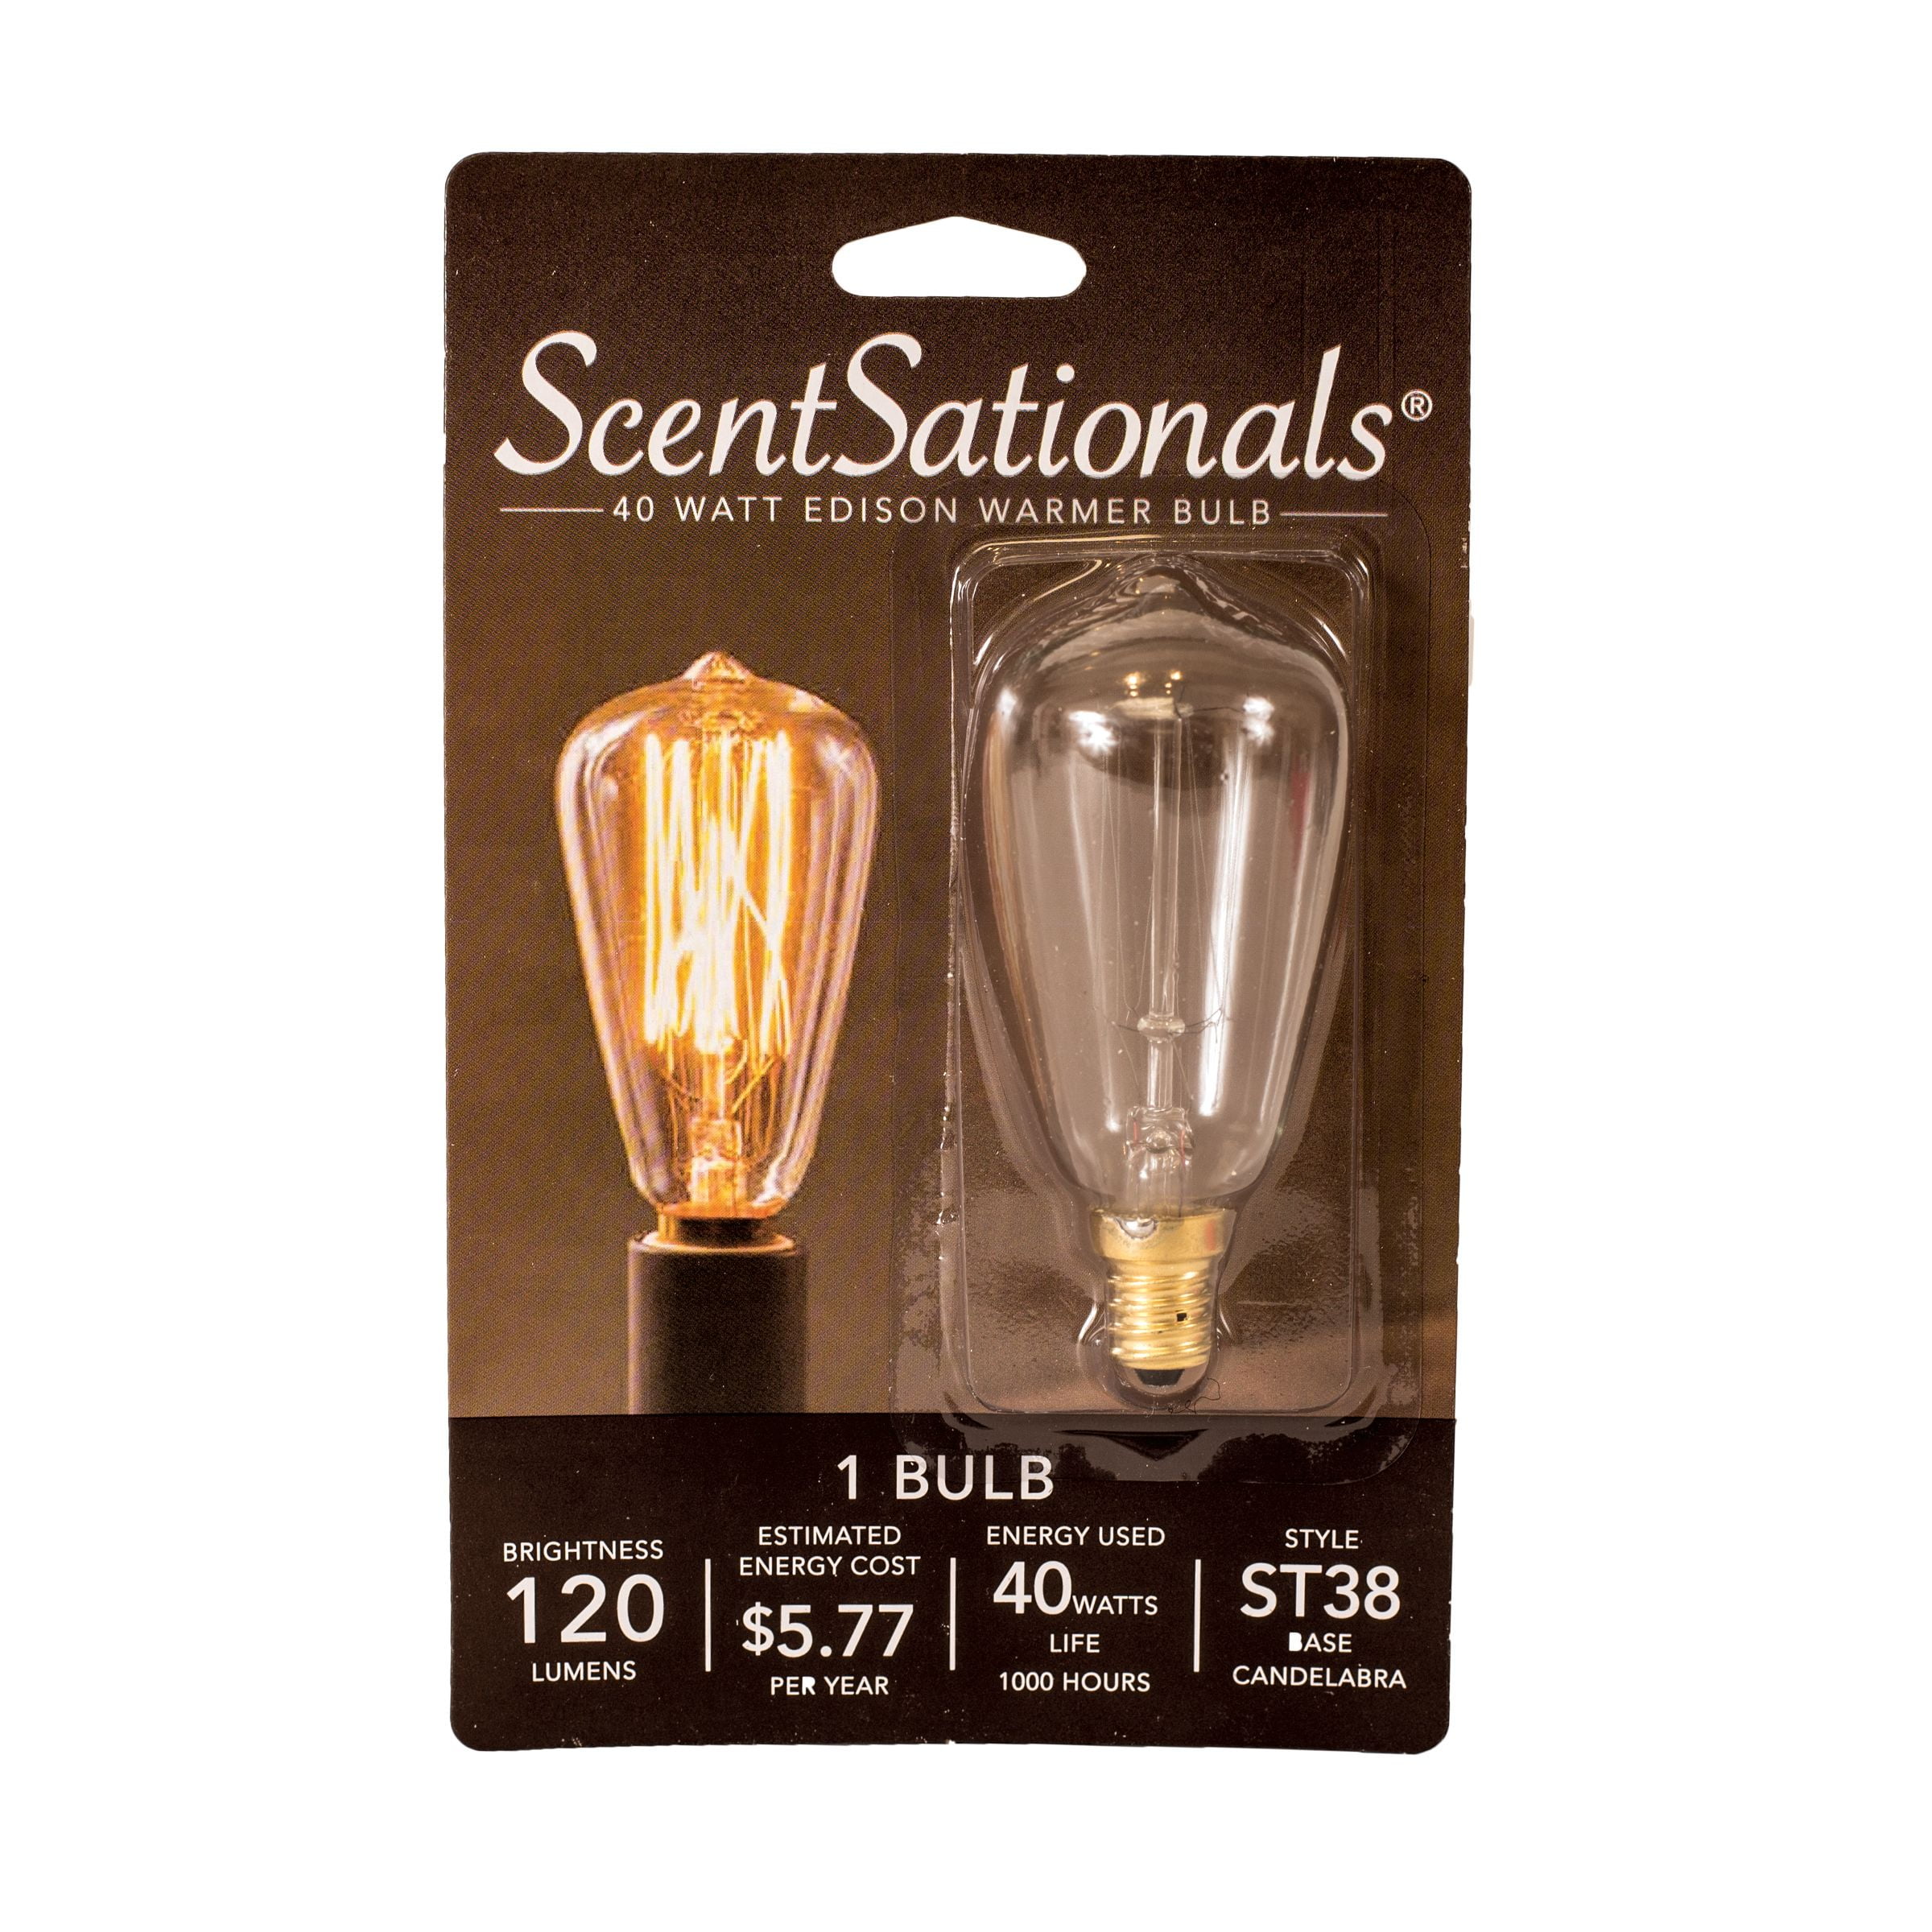 Replacement Bulb for Chesapeake Bay Candle Warmer 25 Watts 120 Volts